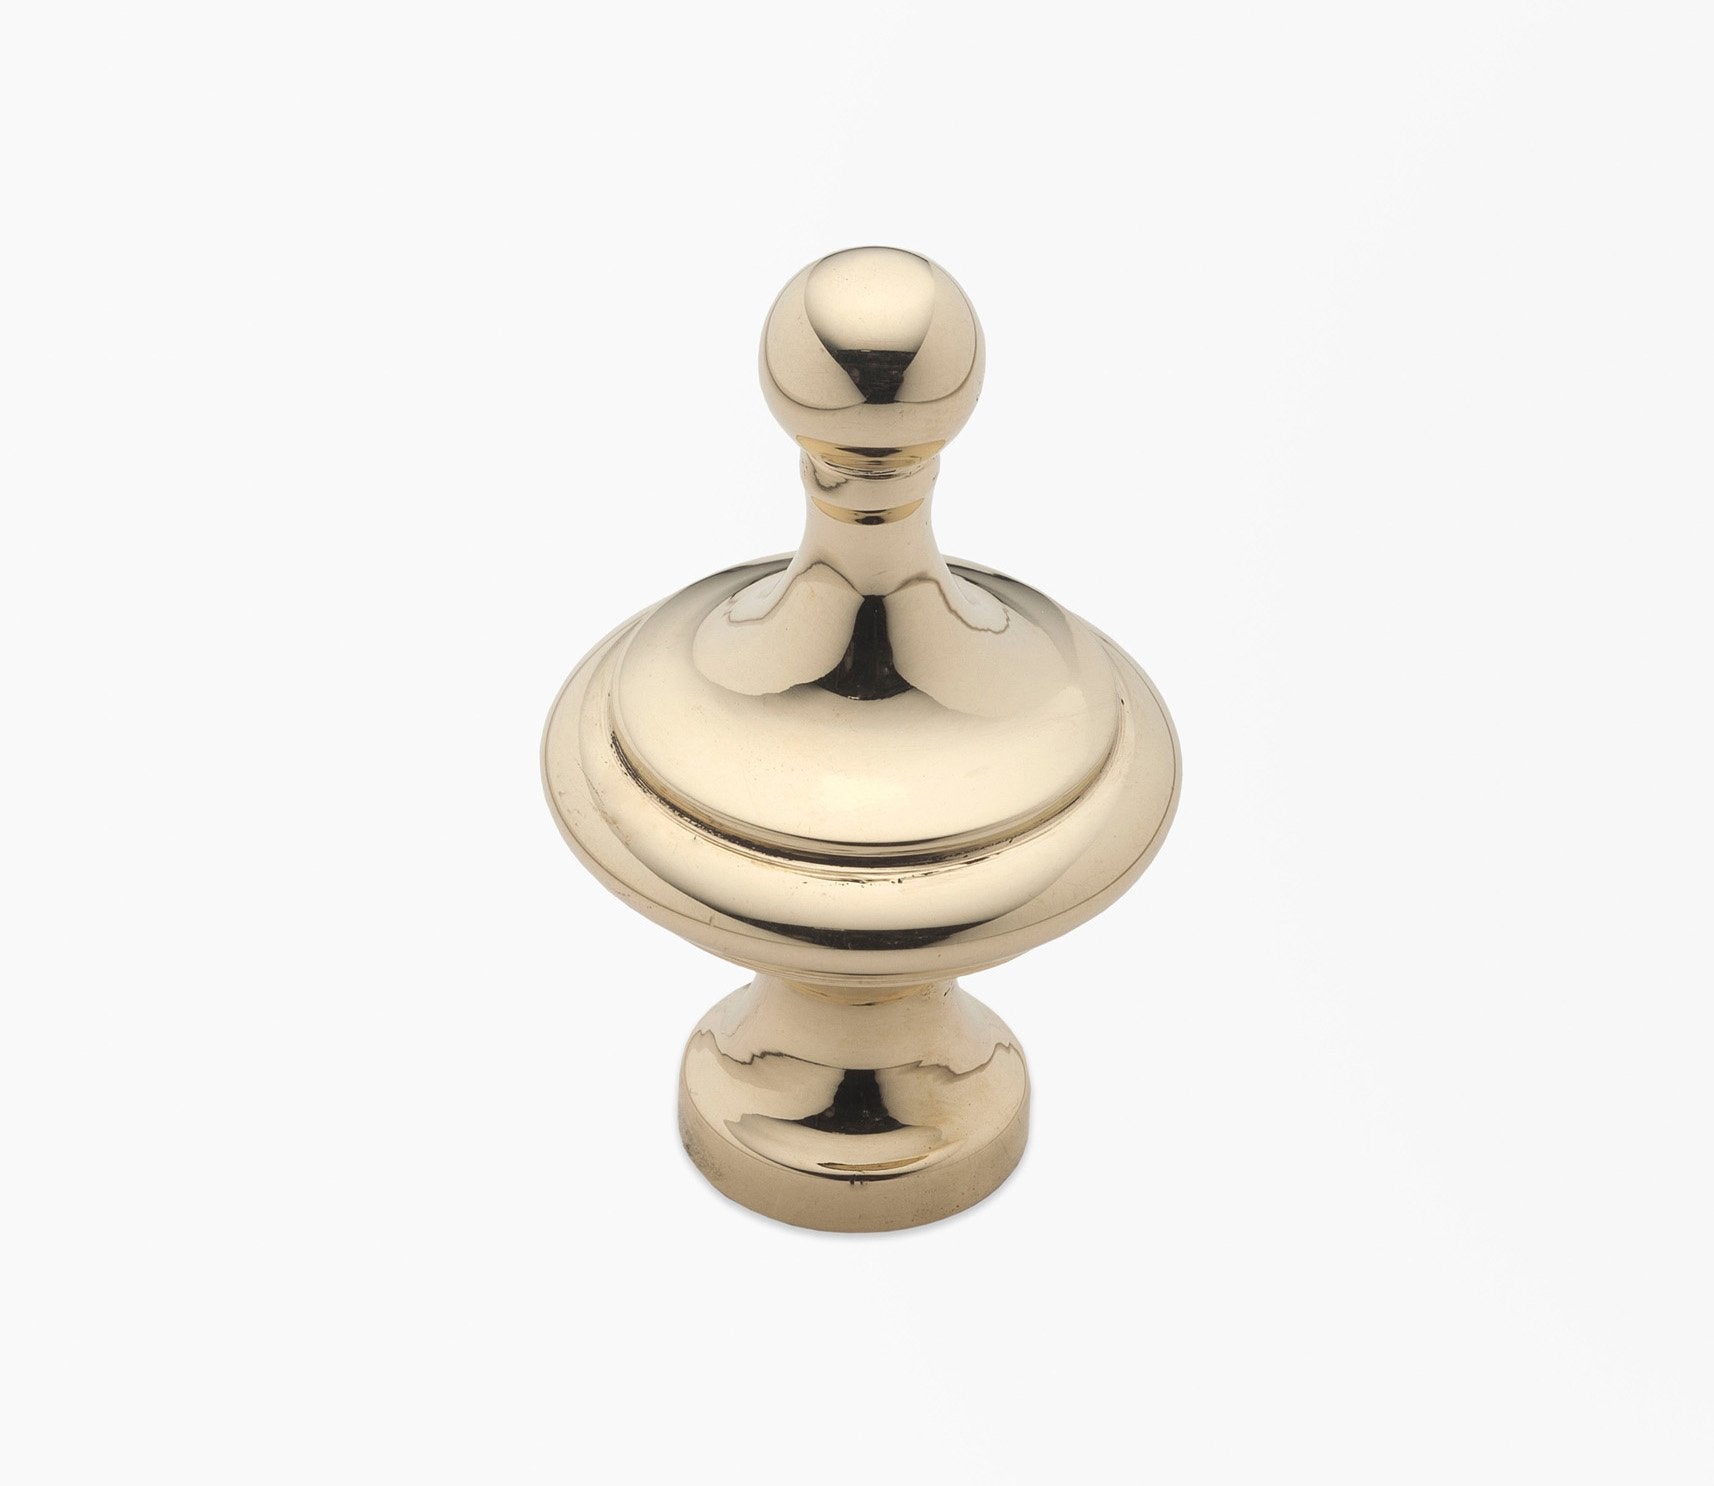 Finial 219 Product Image 1